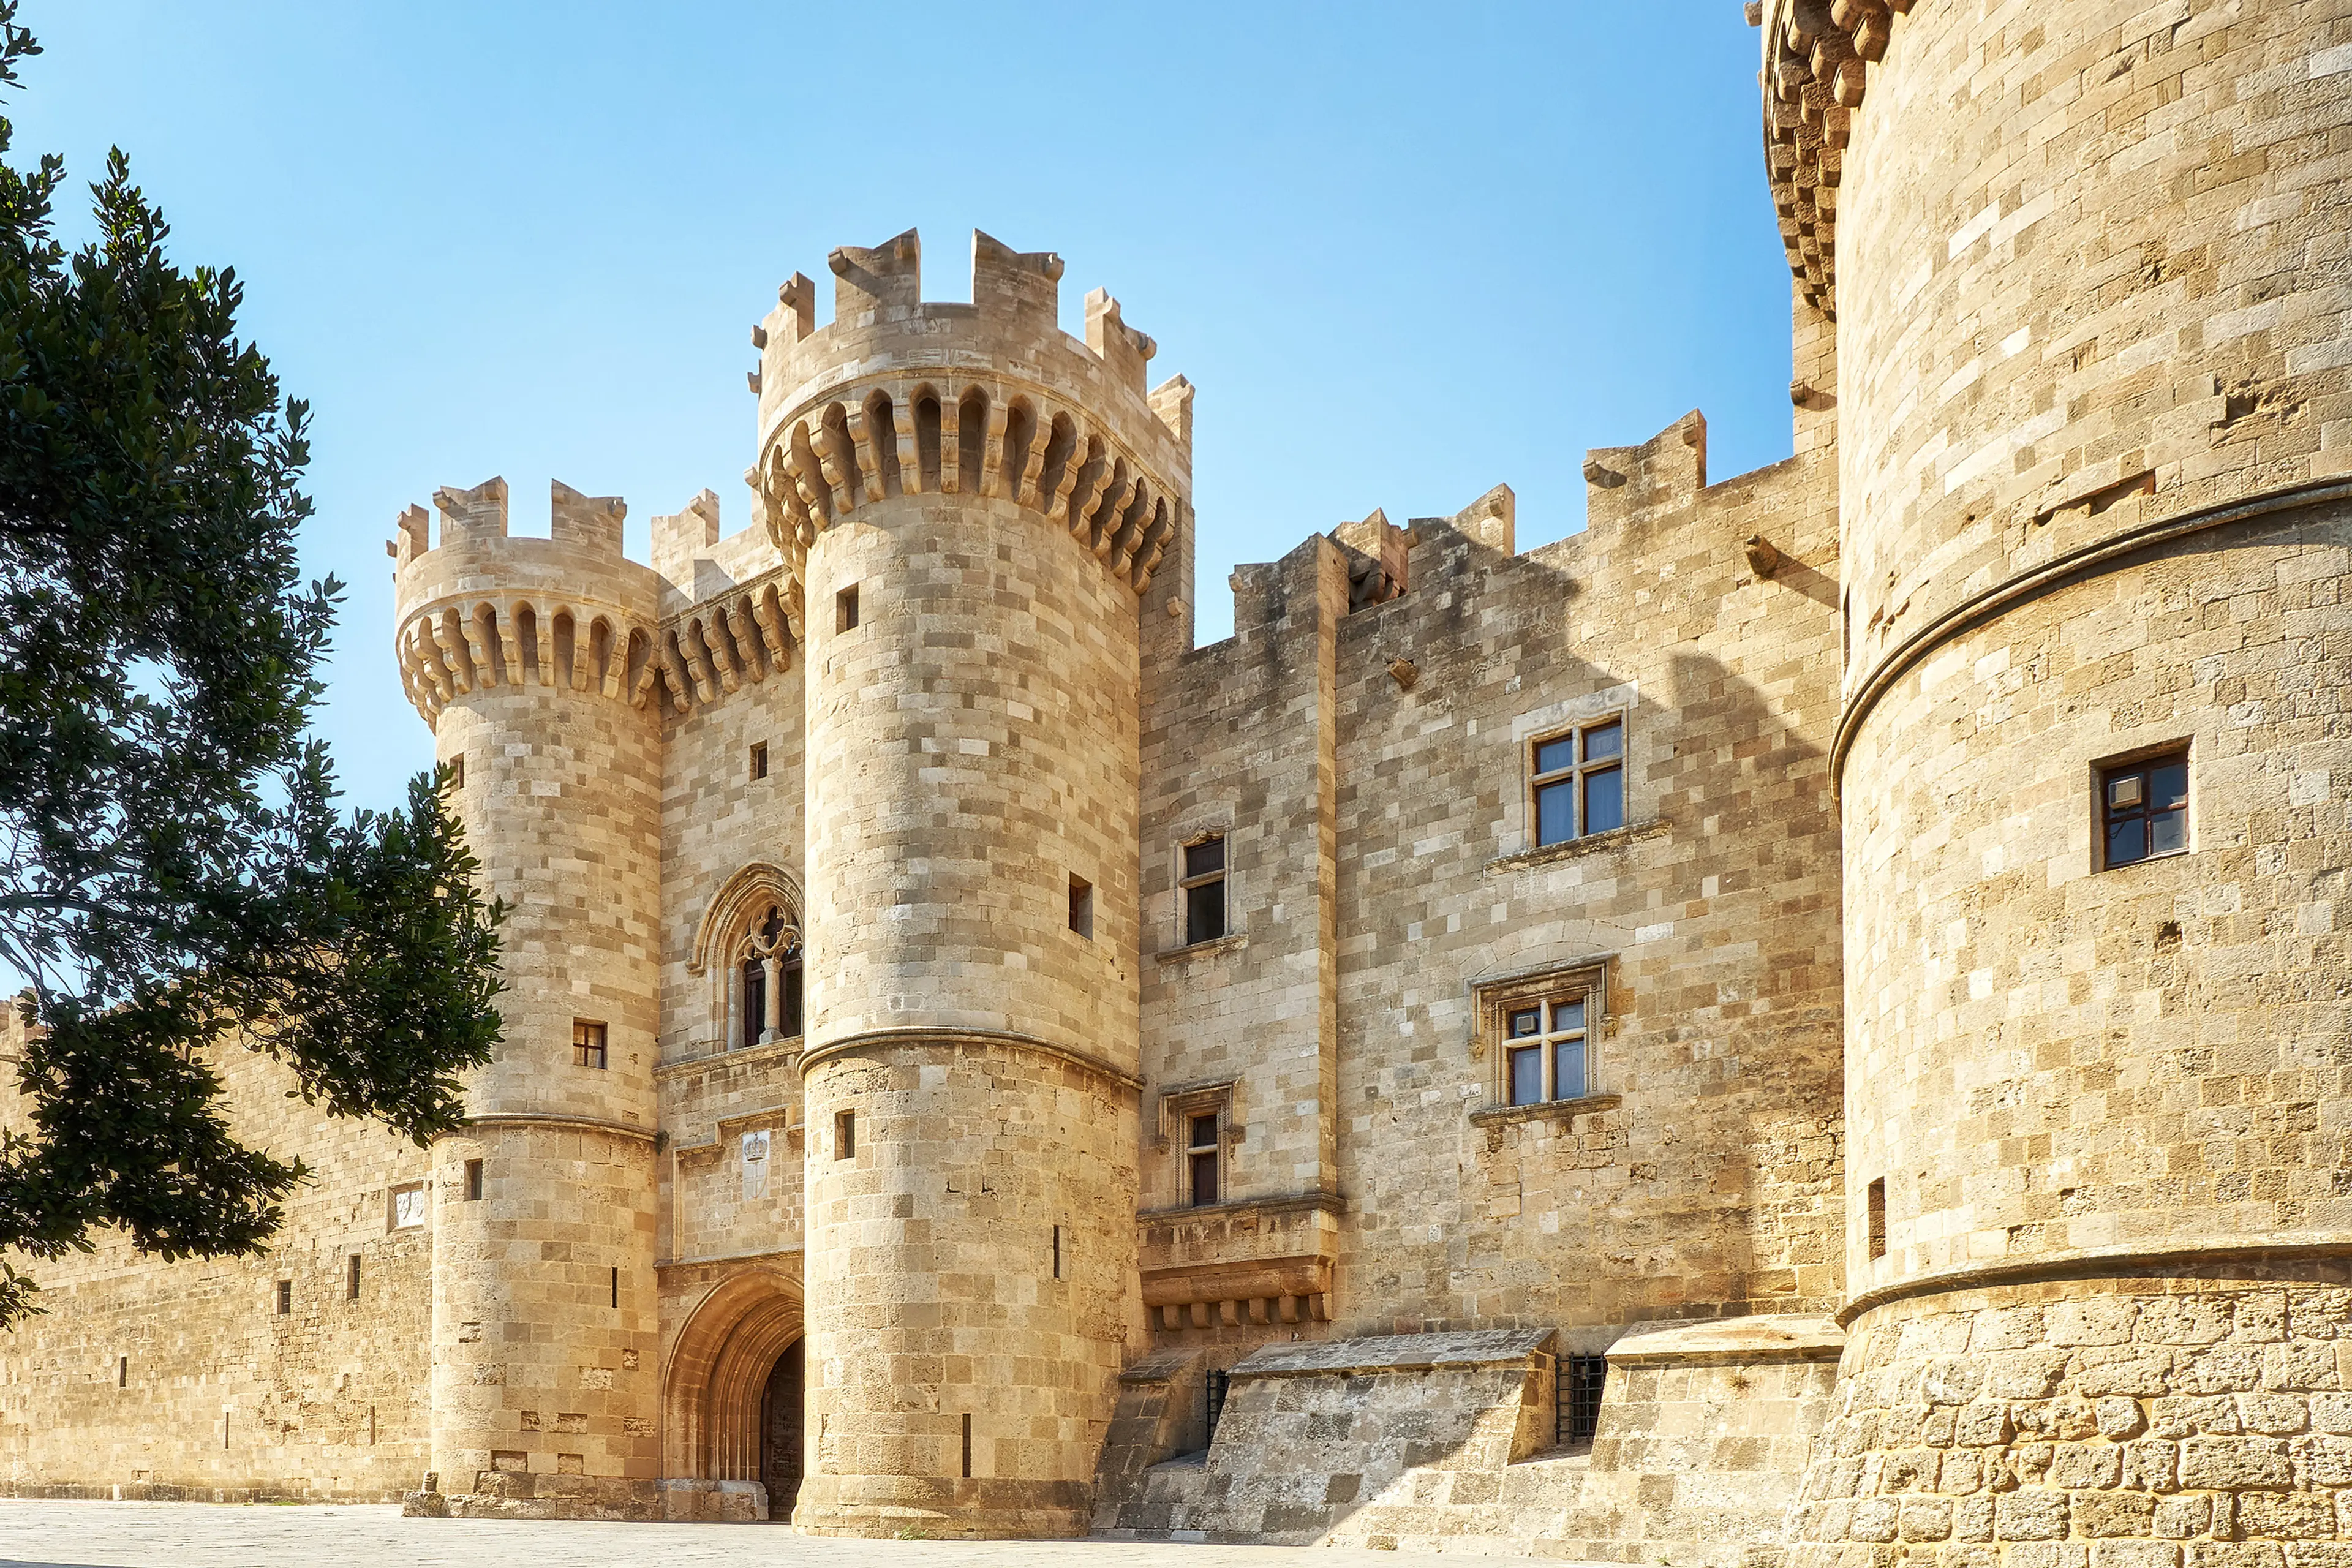 3-Day Exquisite Itinerary for Rhodes, Greece